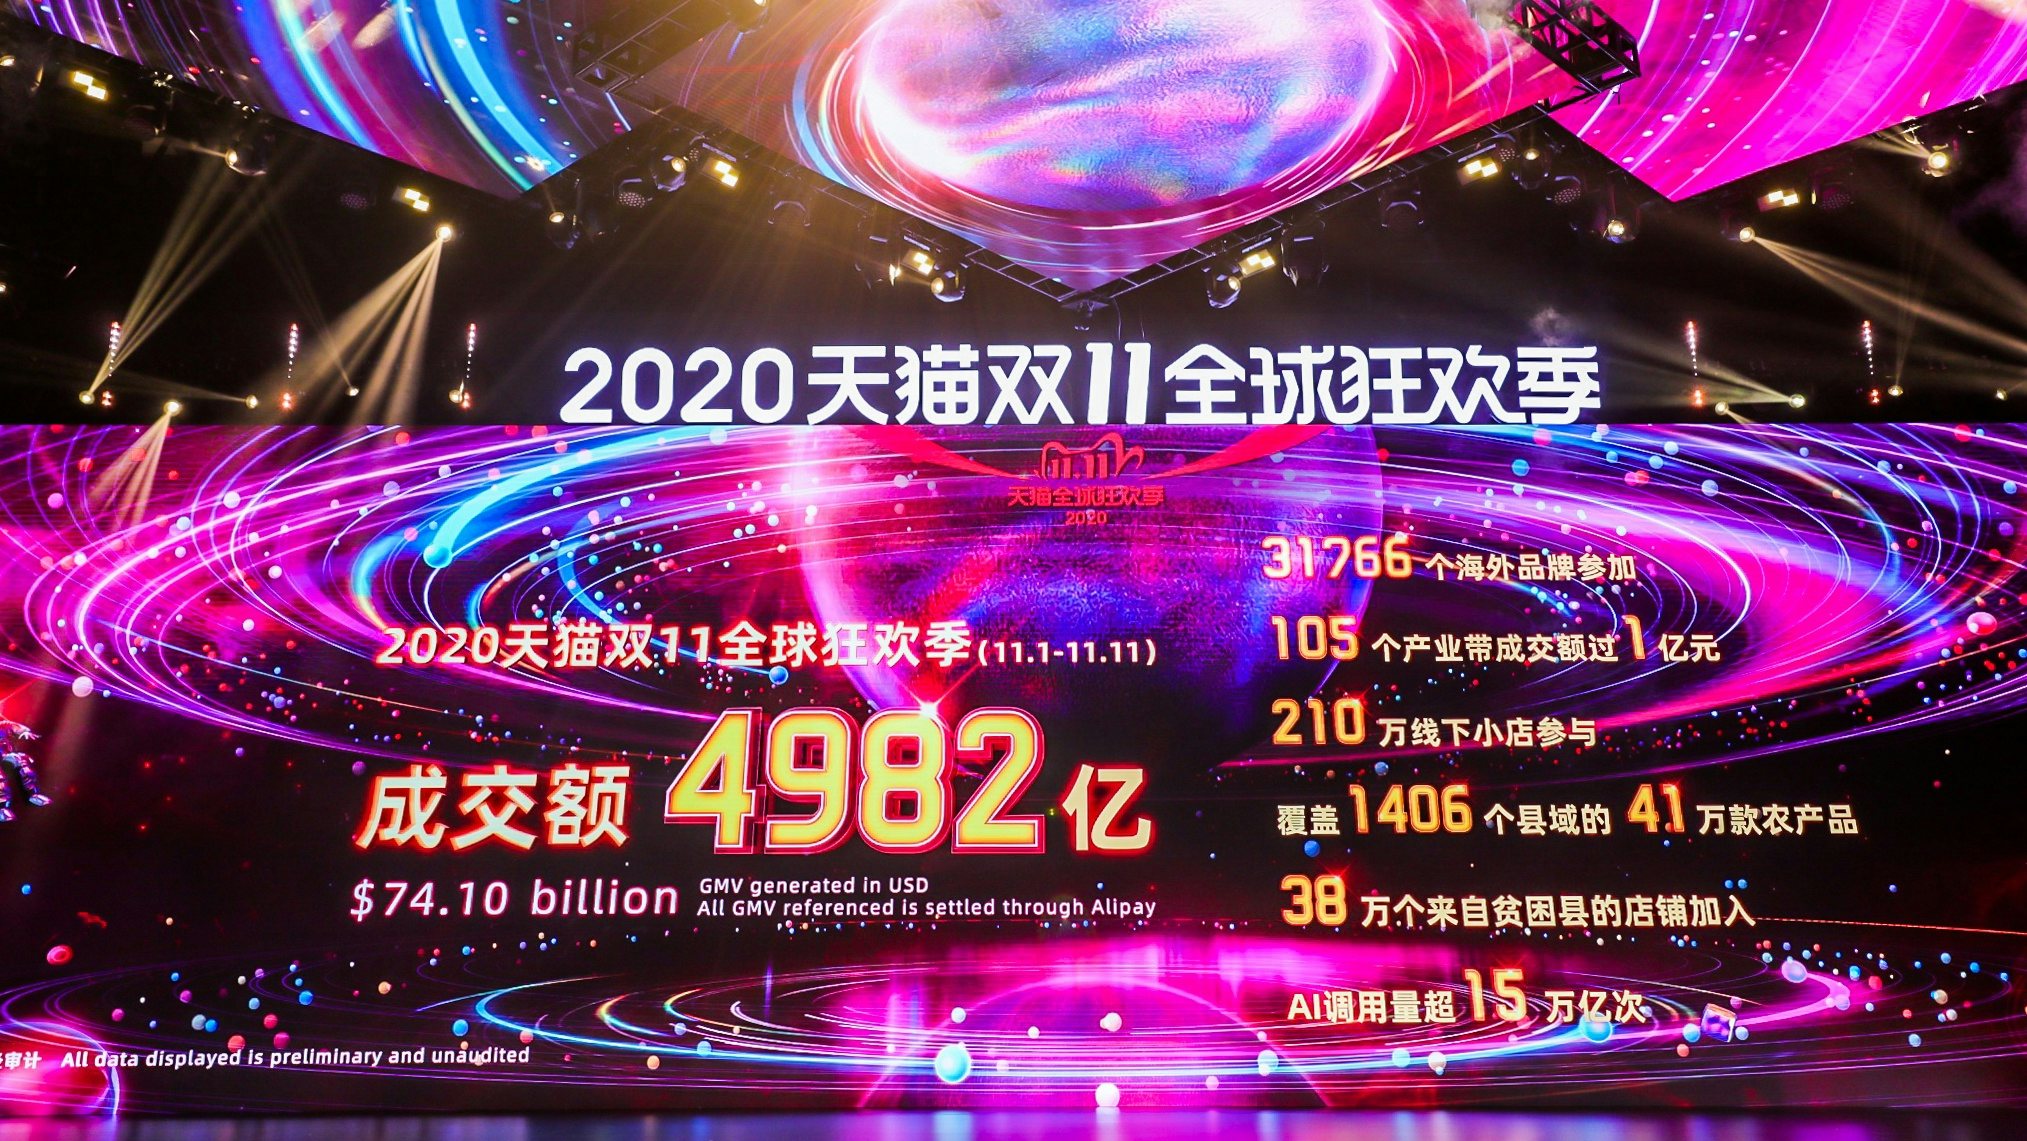 Despite the pandemic, China is still spending. This year’s Singles’ Day Shopping Festival broke many records and featured roughly 200 luxury brands. Photo: Alibaba 